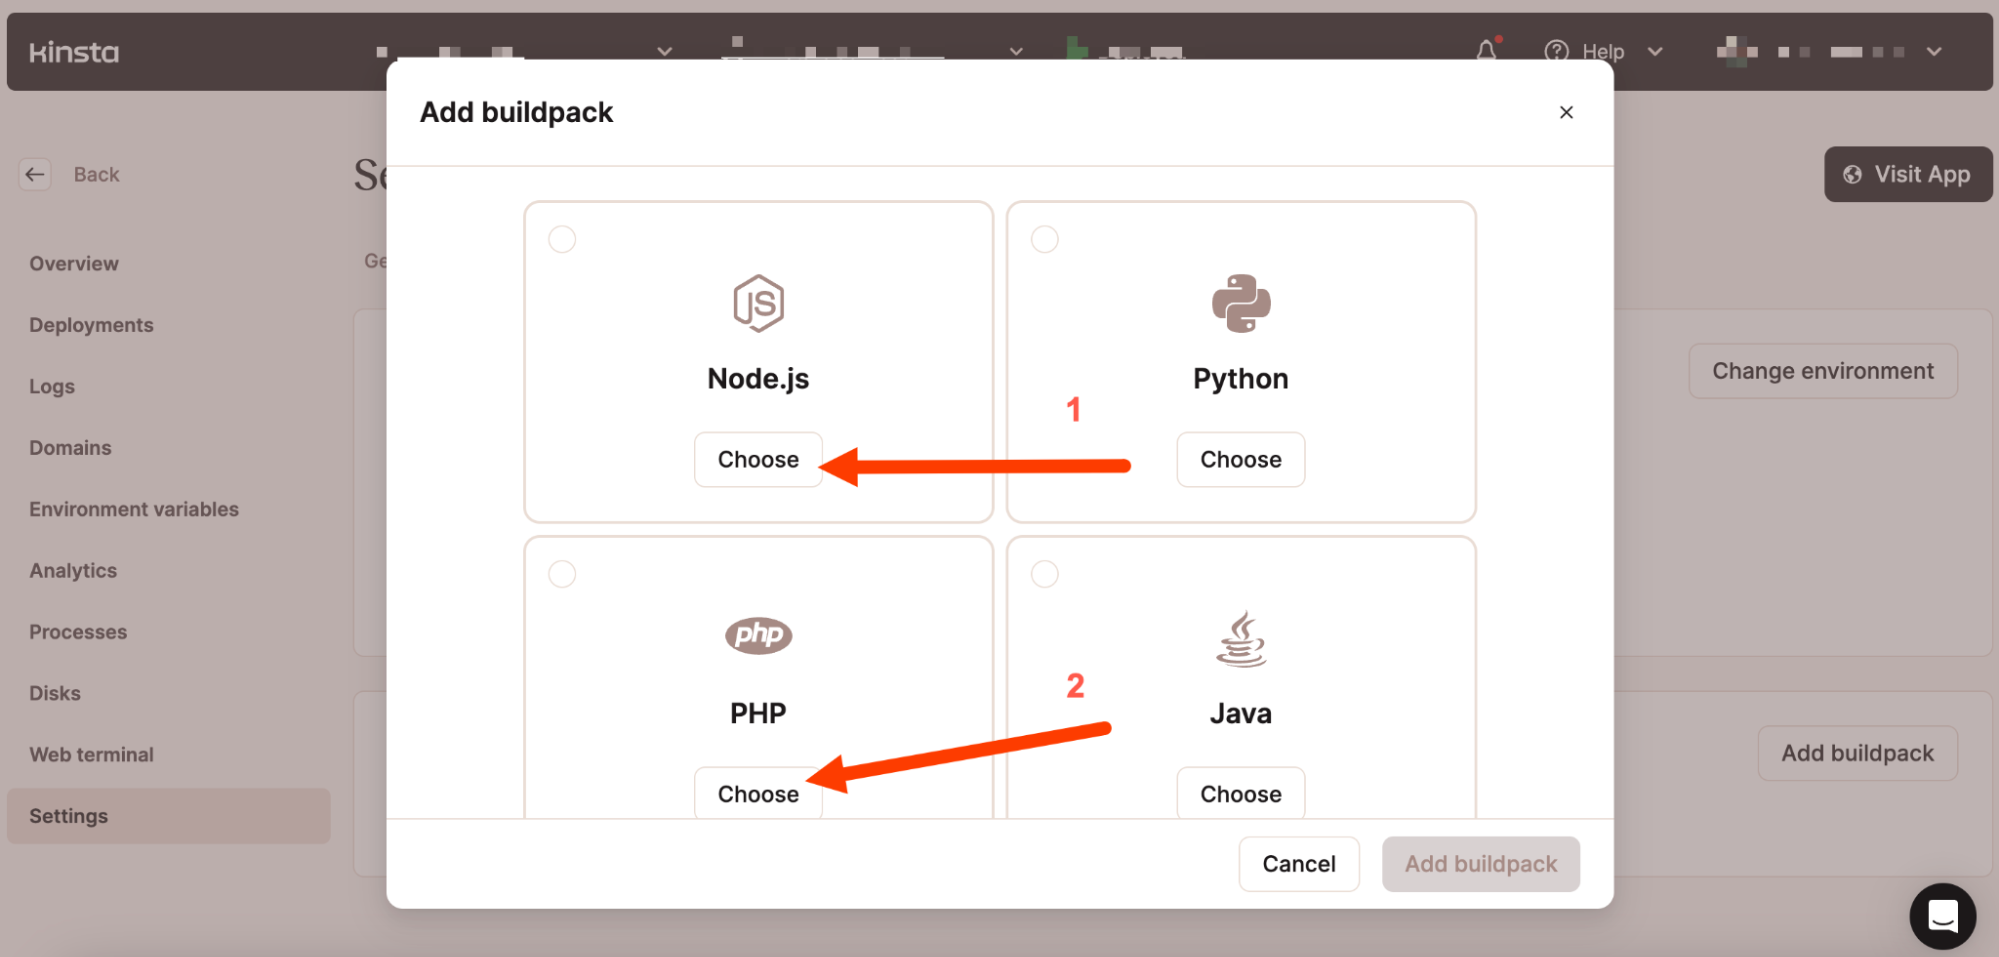 Add buildpack screen, select Node.js and PHP